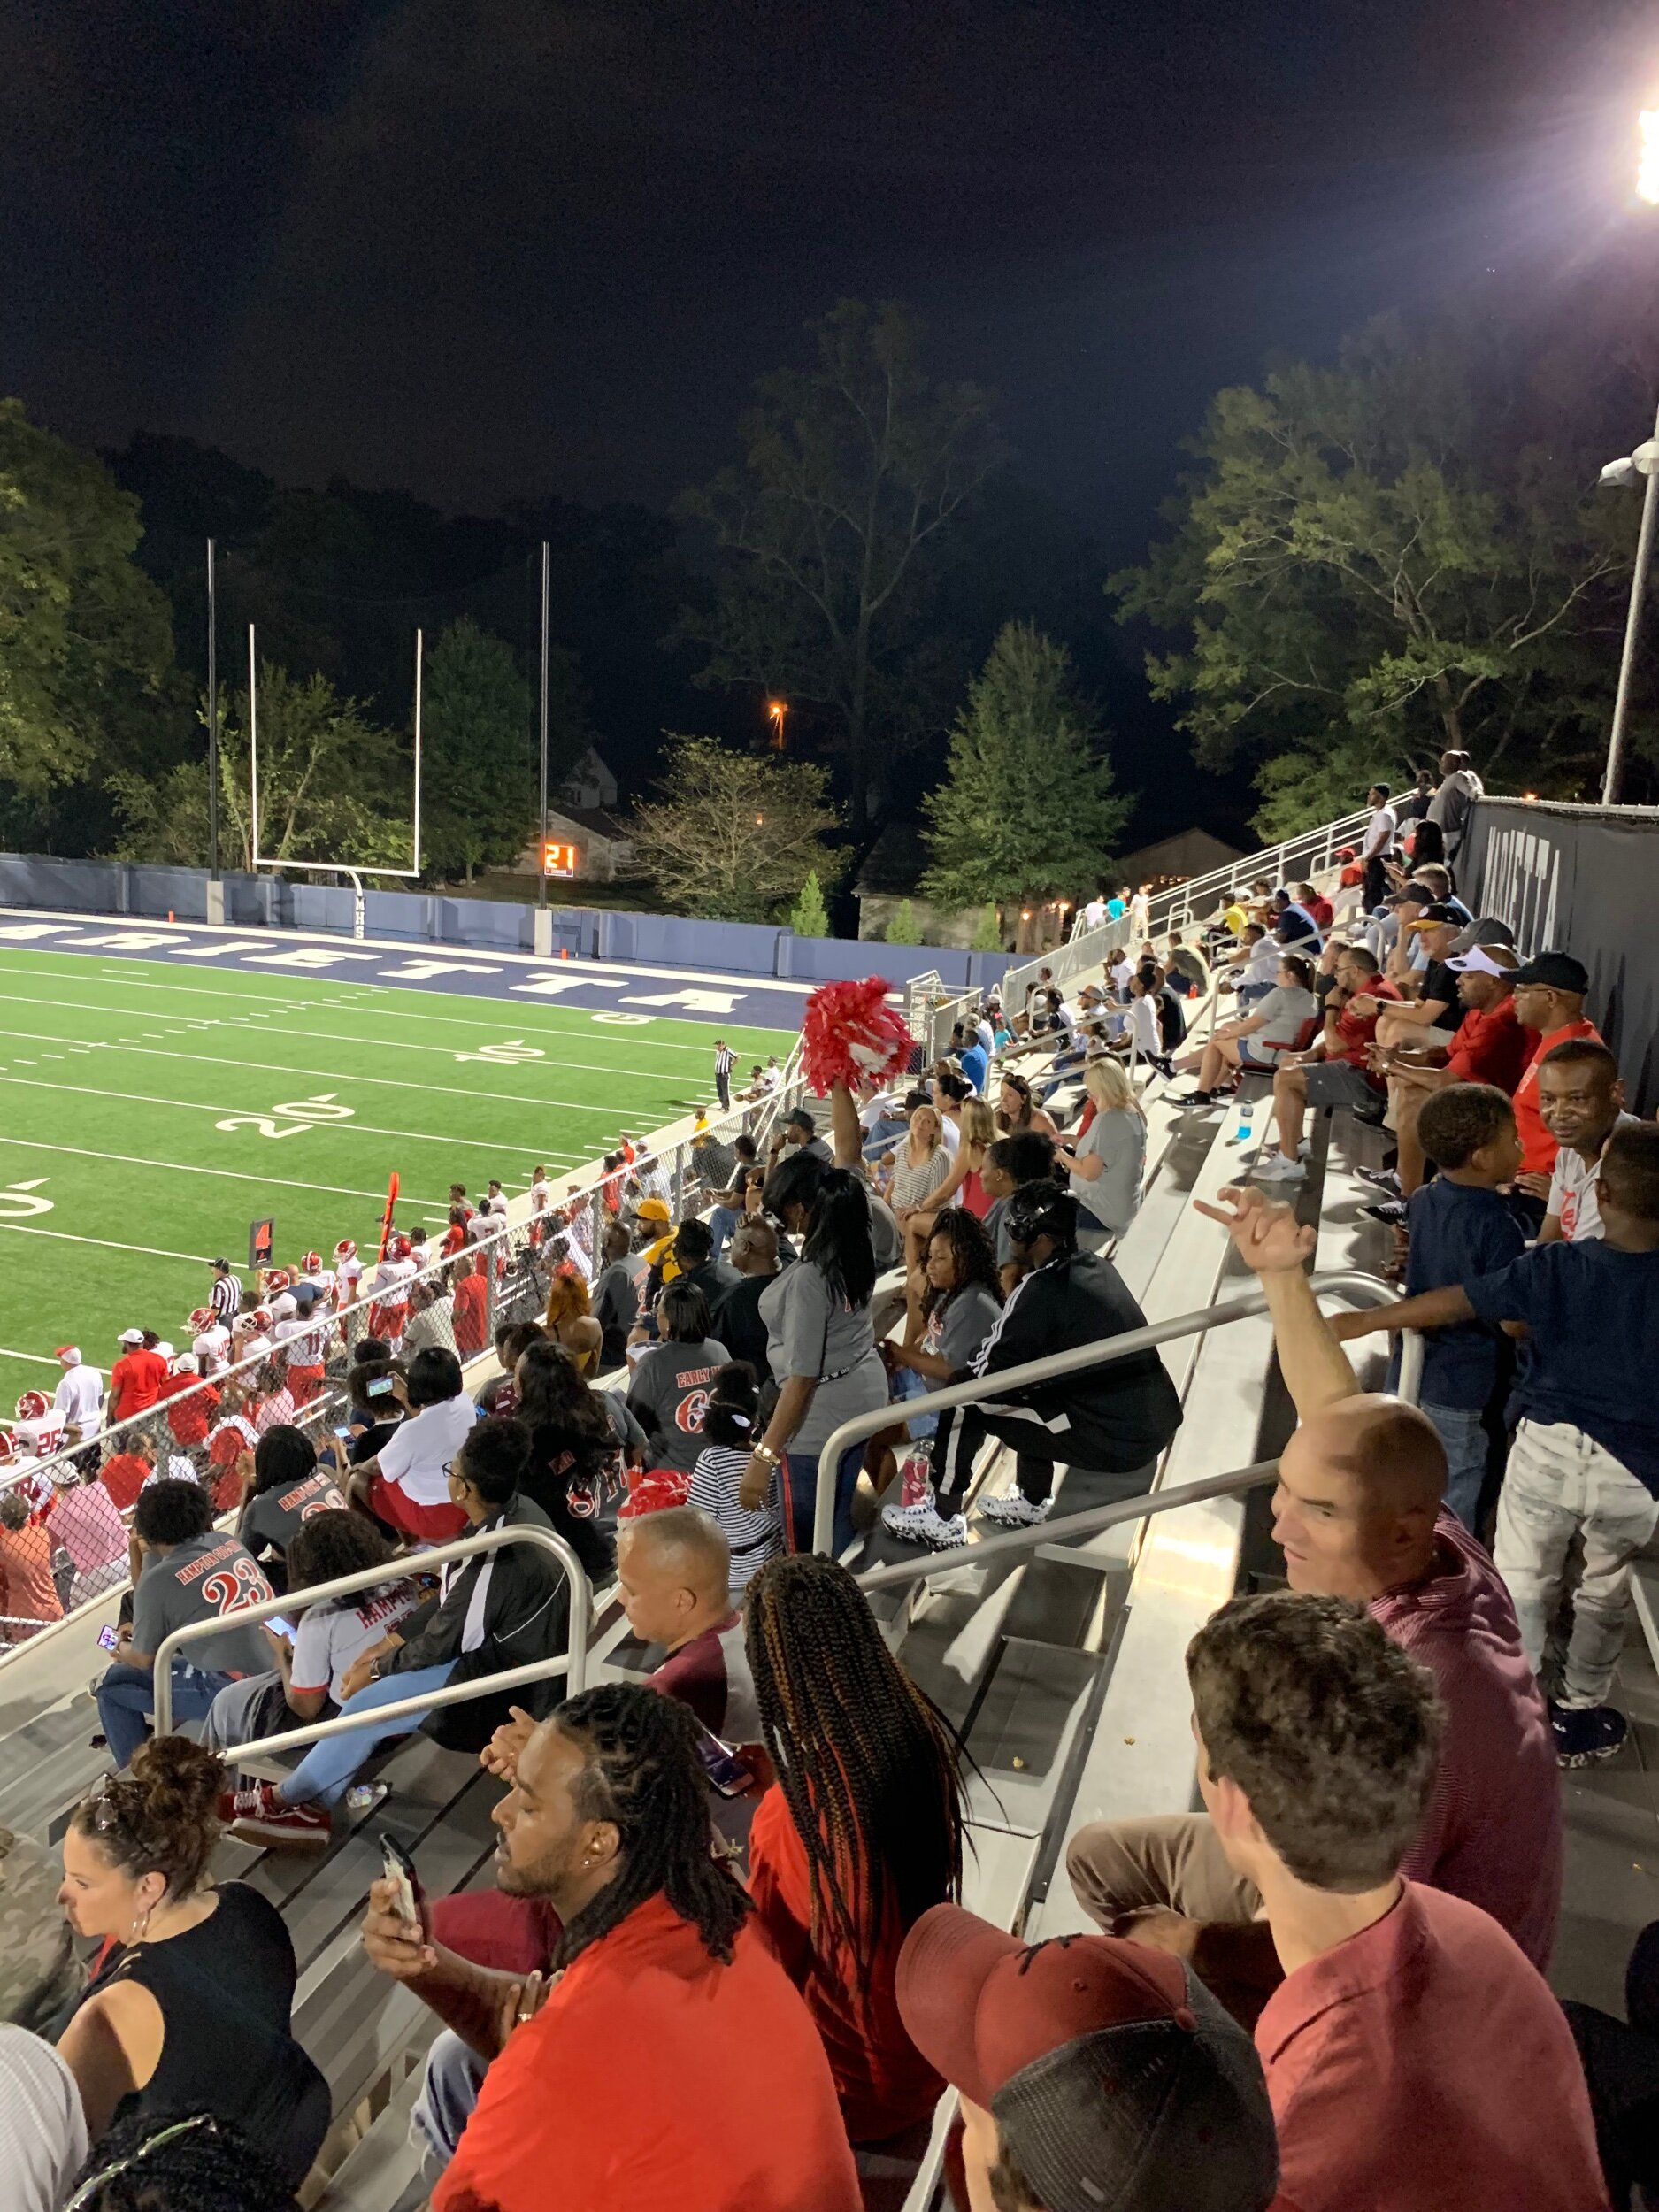 Edgewater brought a great crowd all the way from 32804!Total game attendance estimated at 4,500